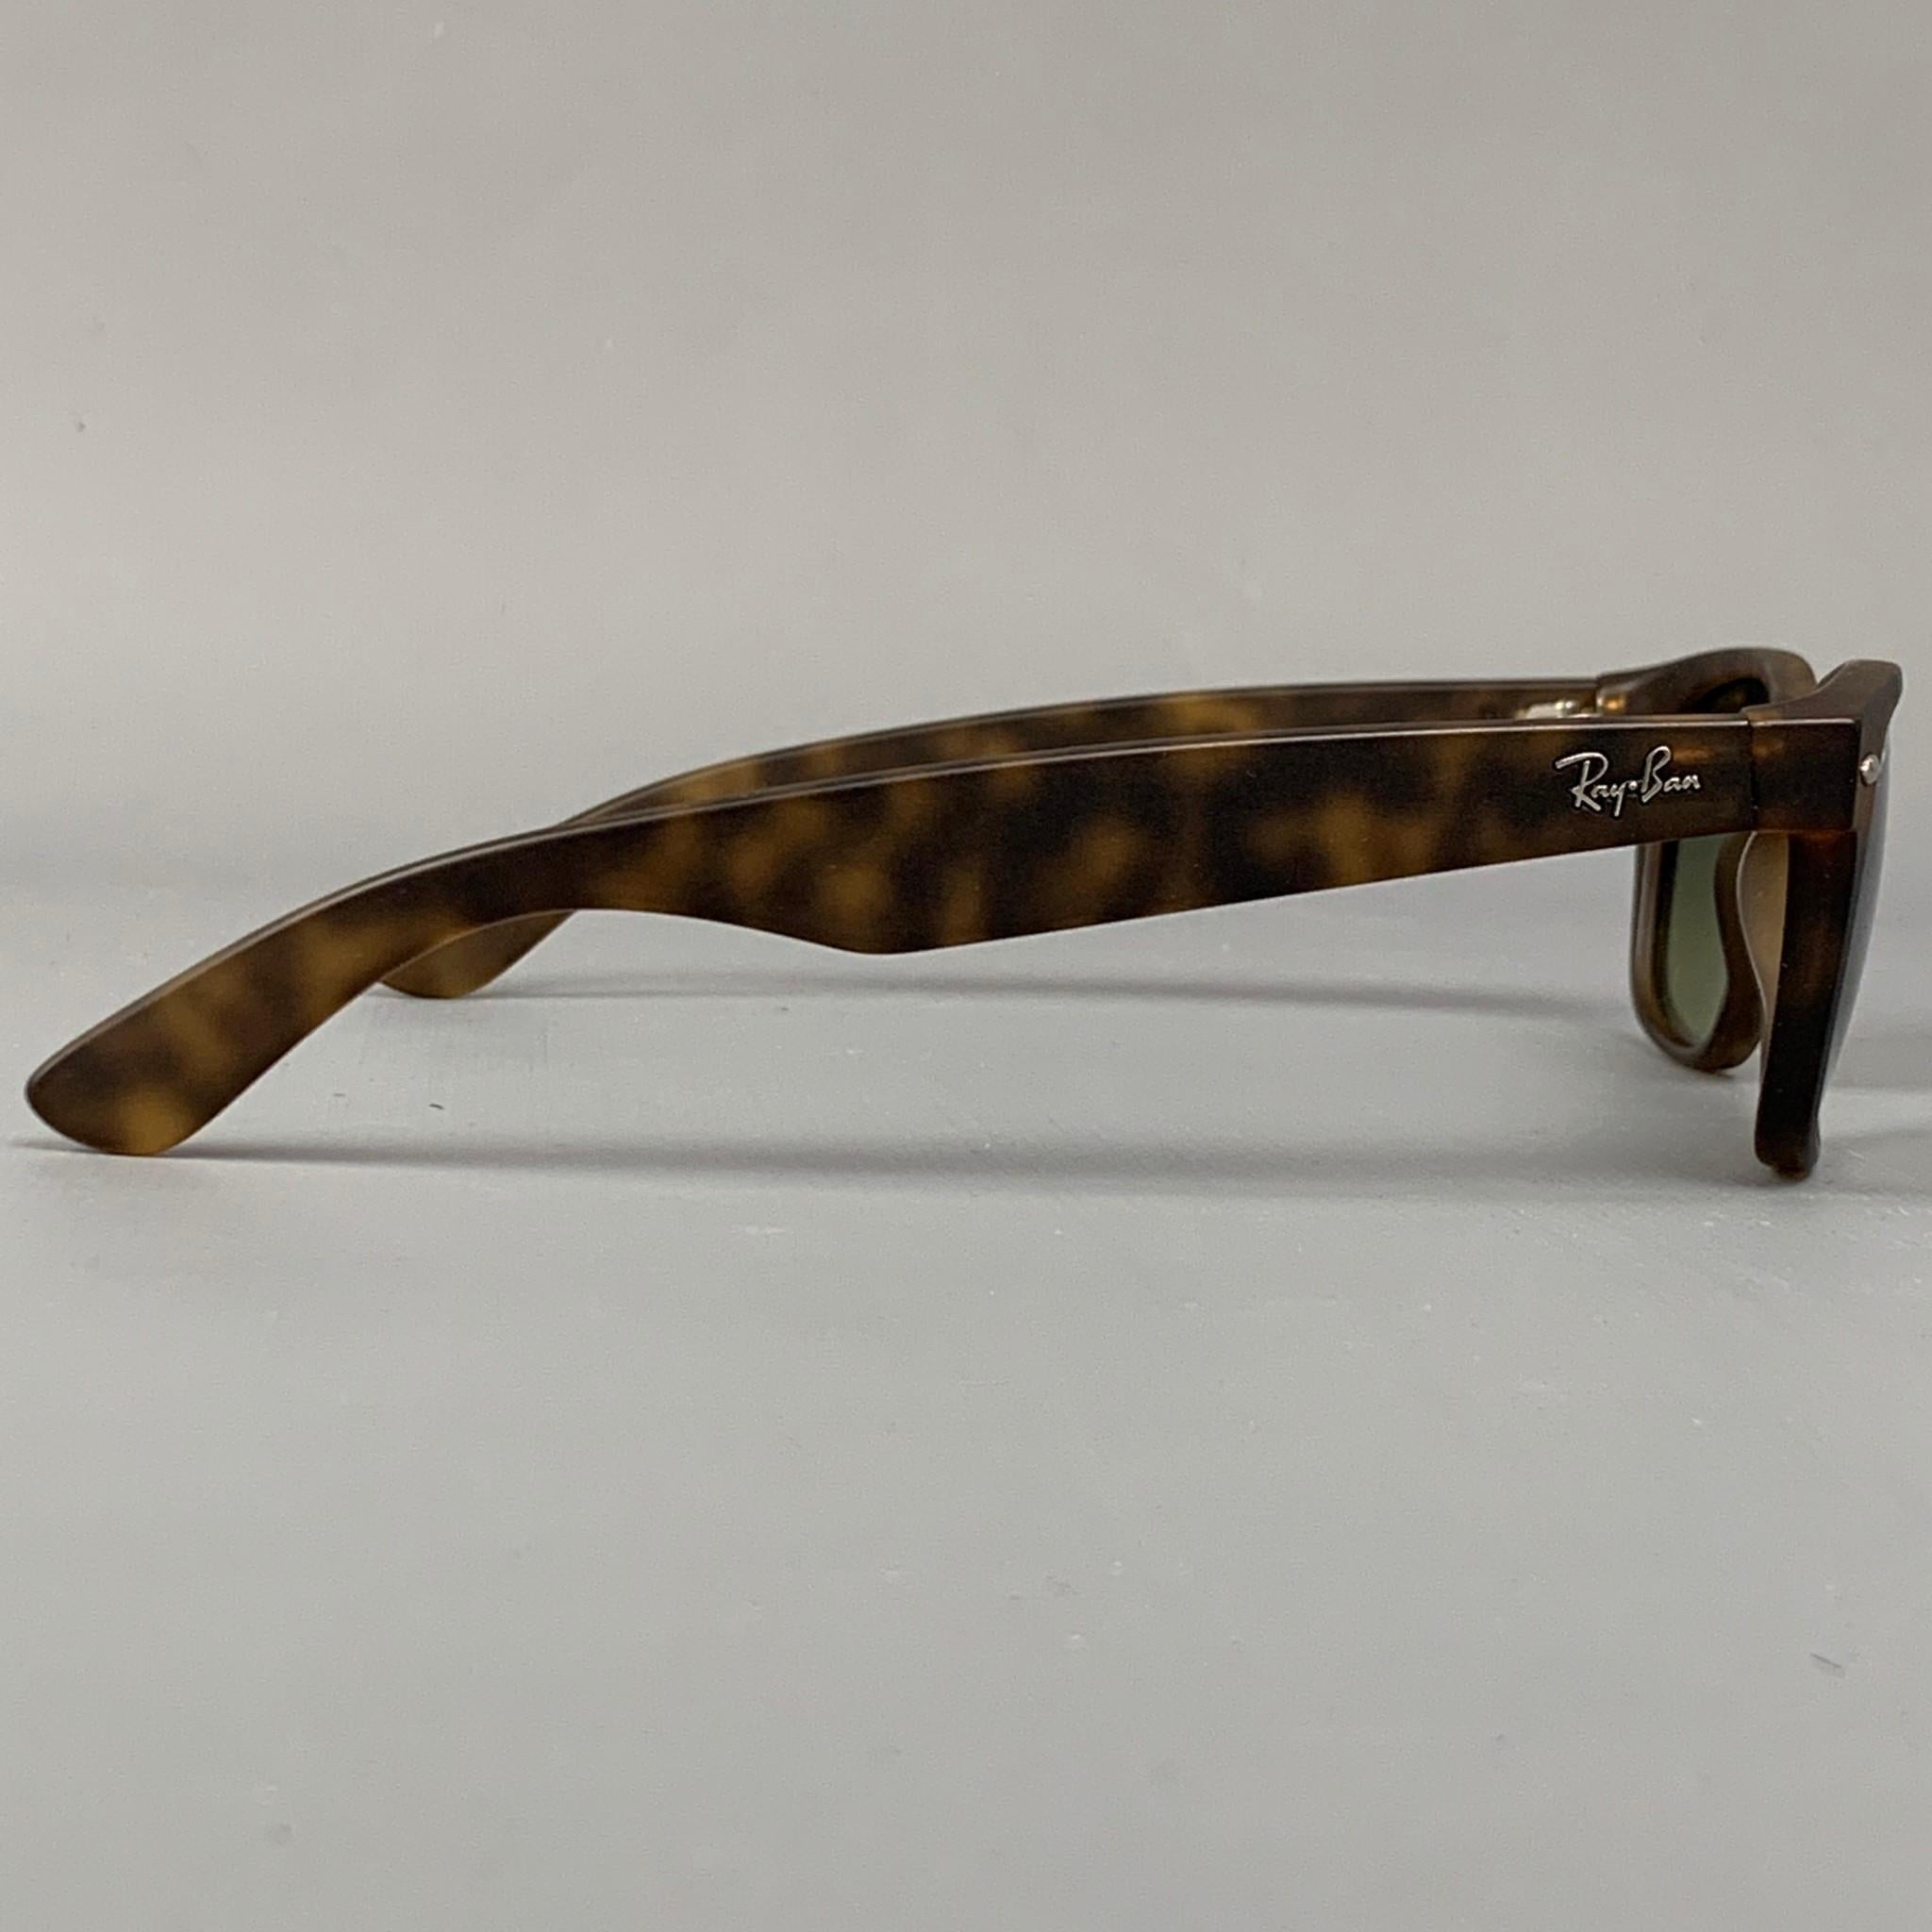 RAY-BAN sunglasses comes in a tortoise shell acetate featuring a 